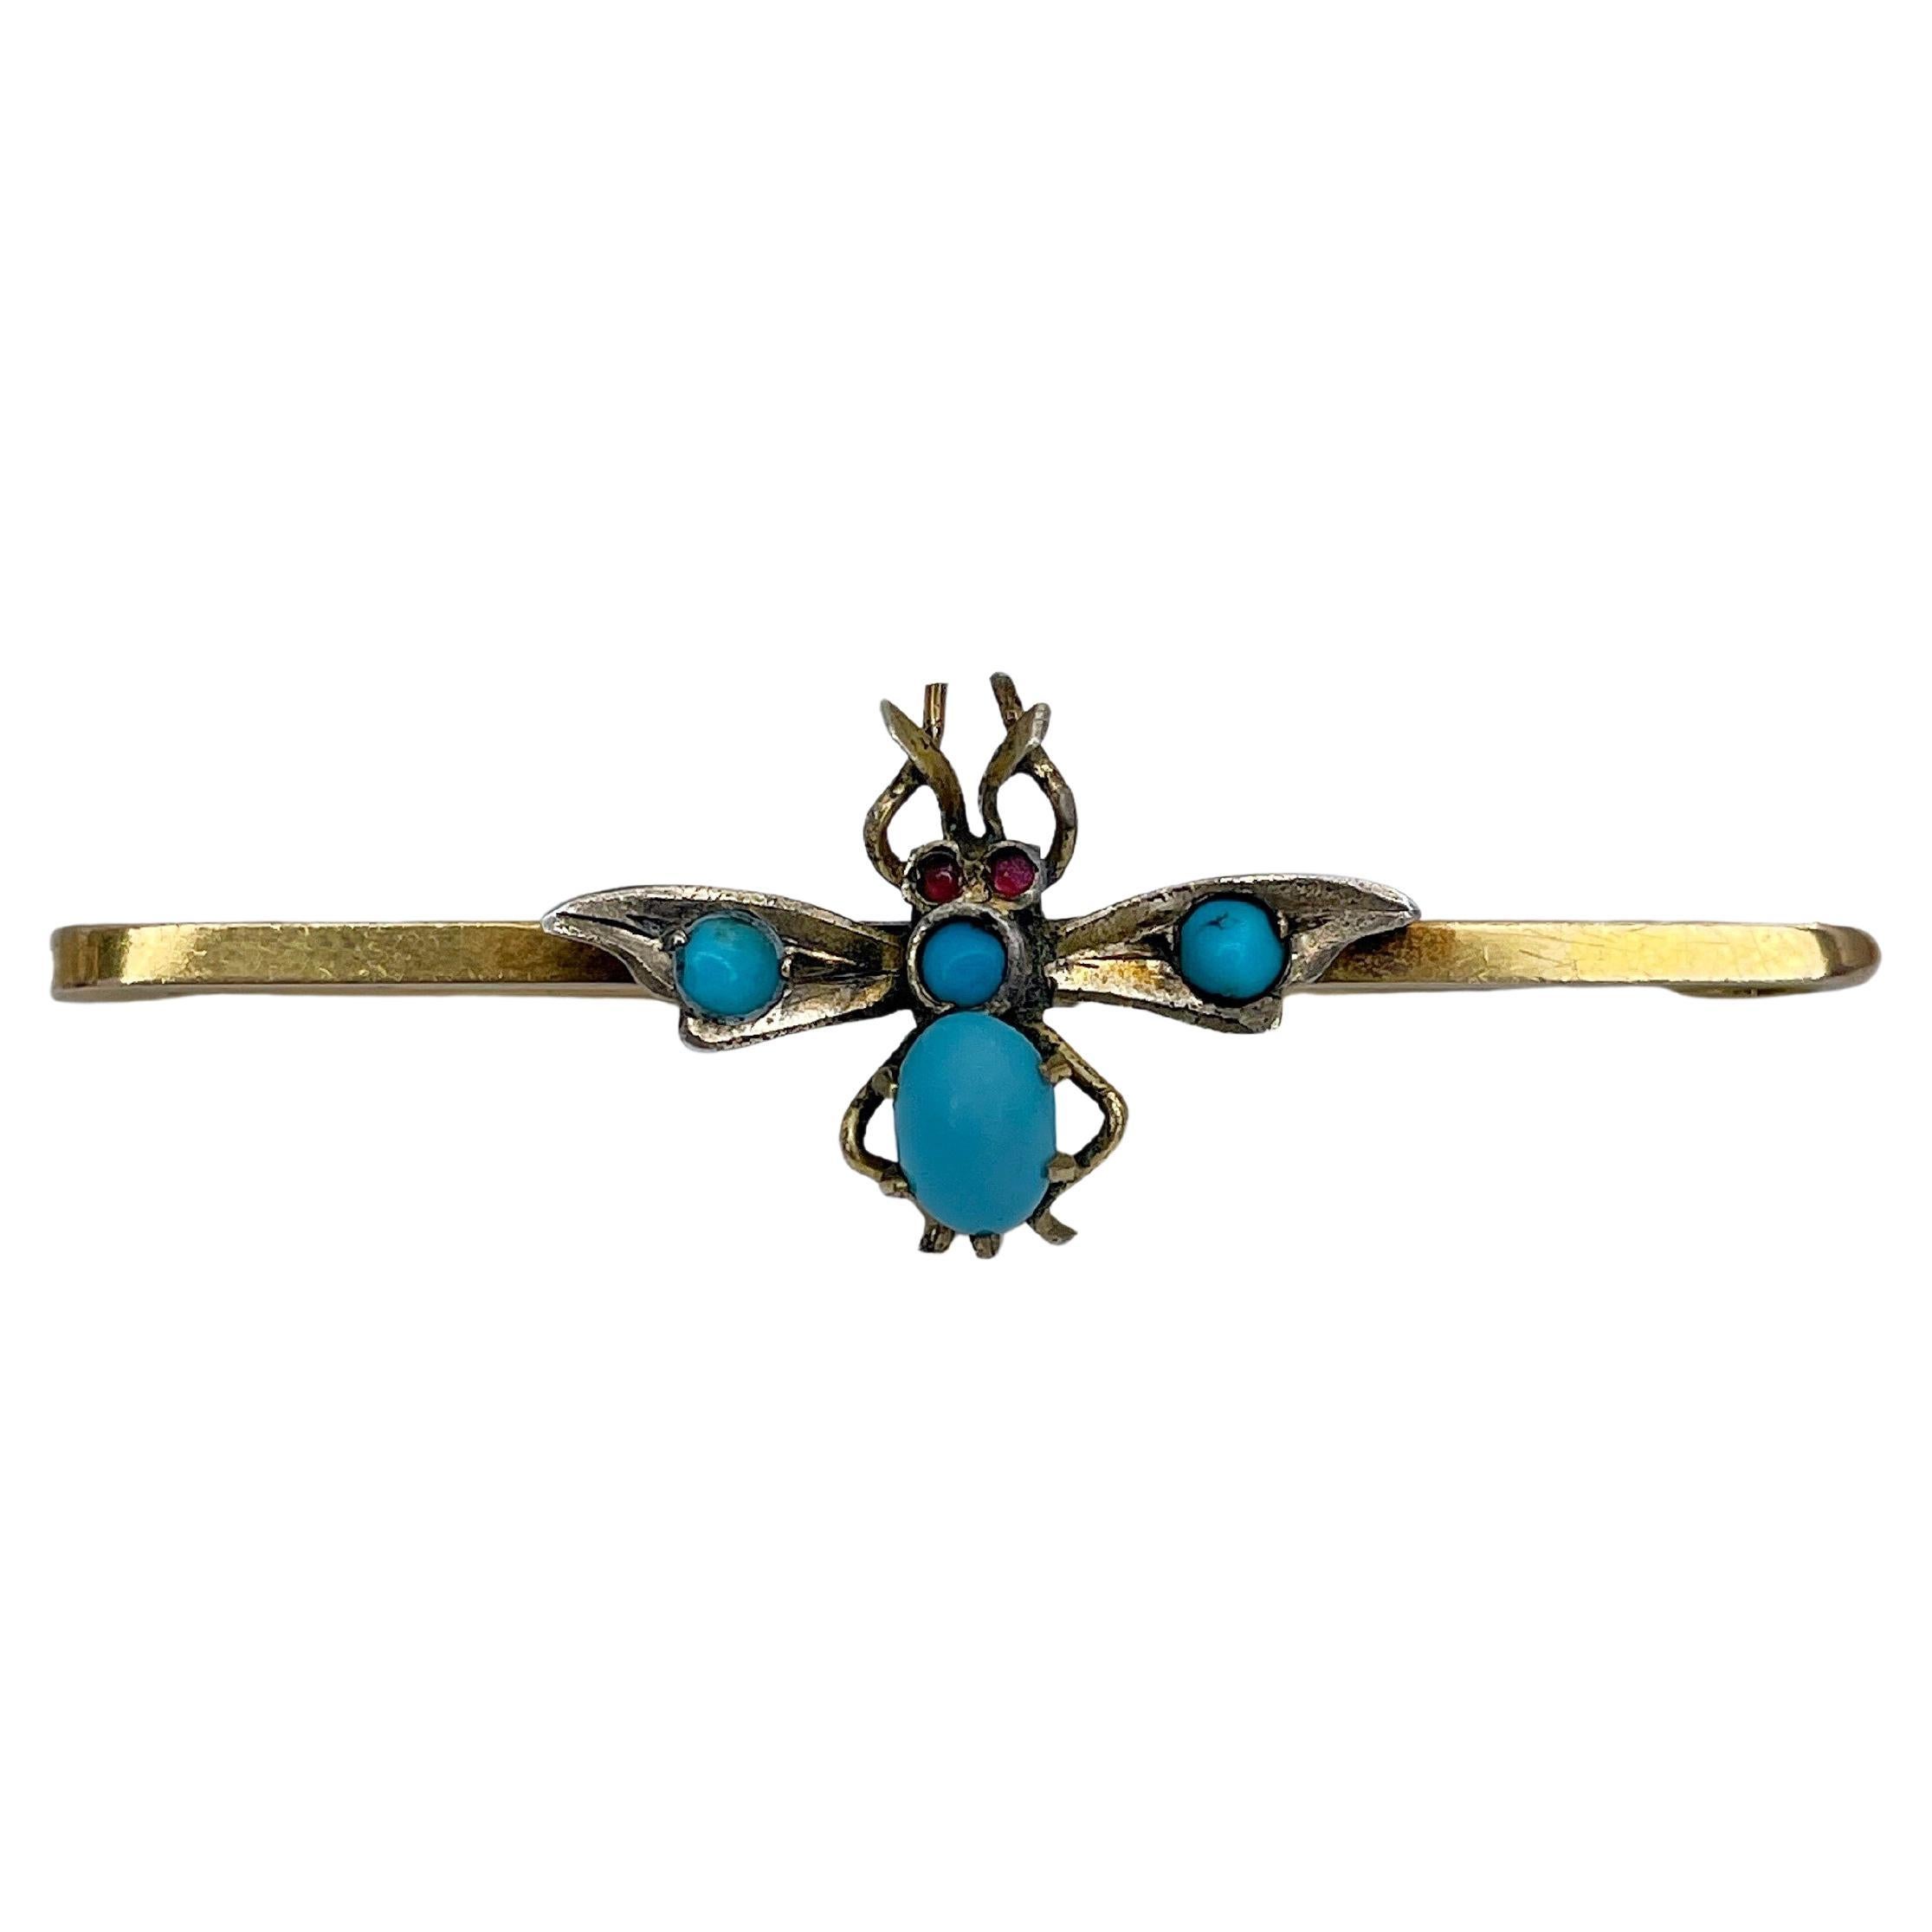 Antique Victorian 9 Karat Gold Turquoise Insect Bar Brooch